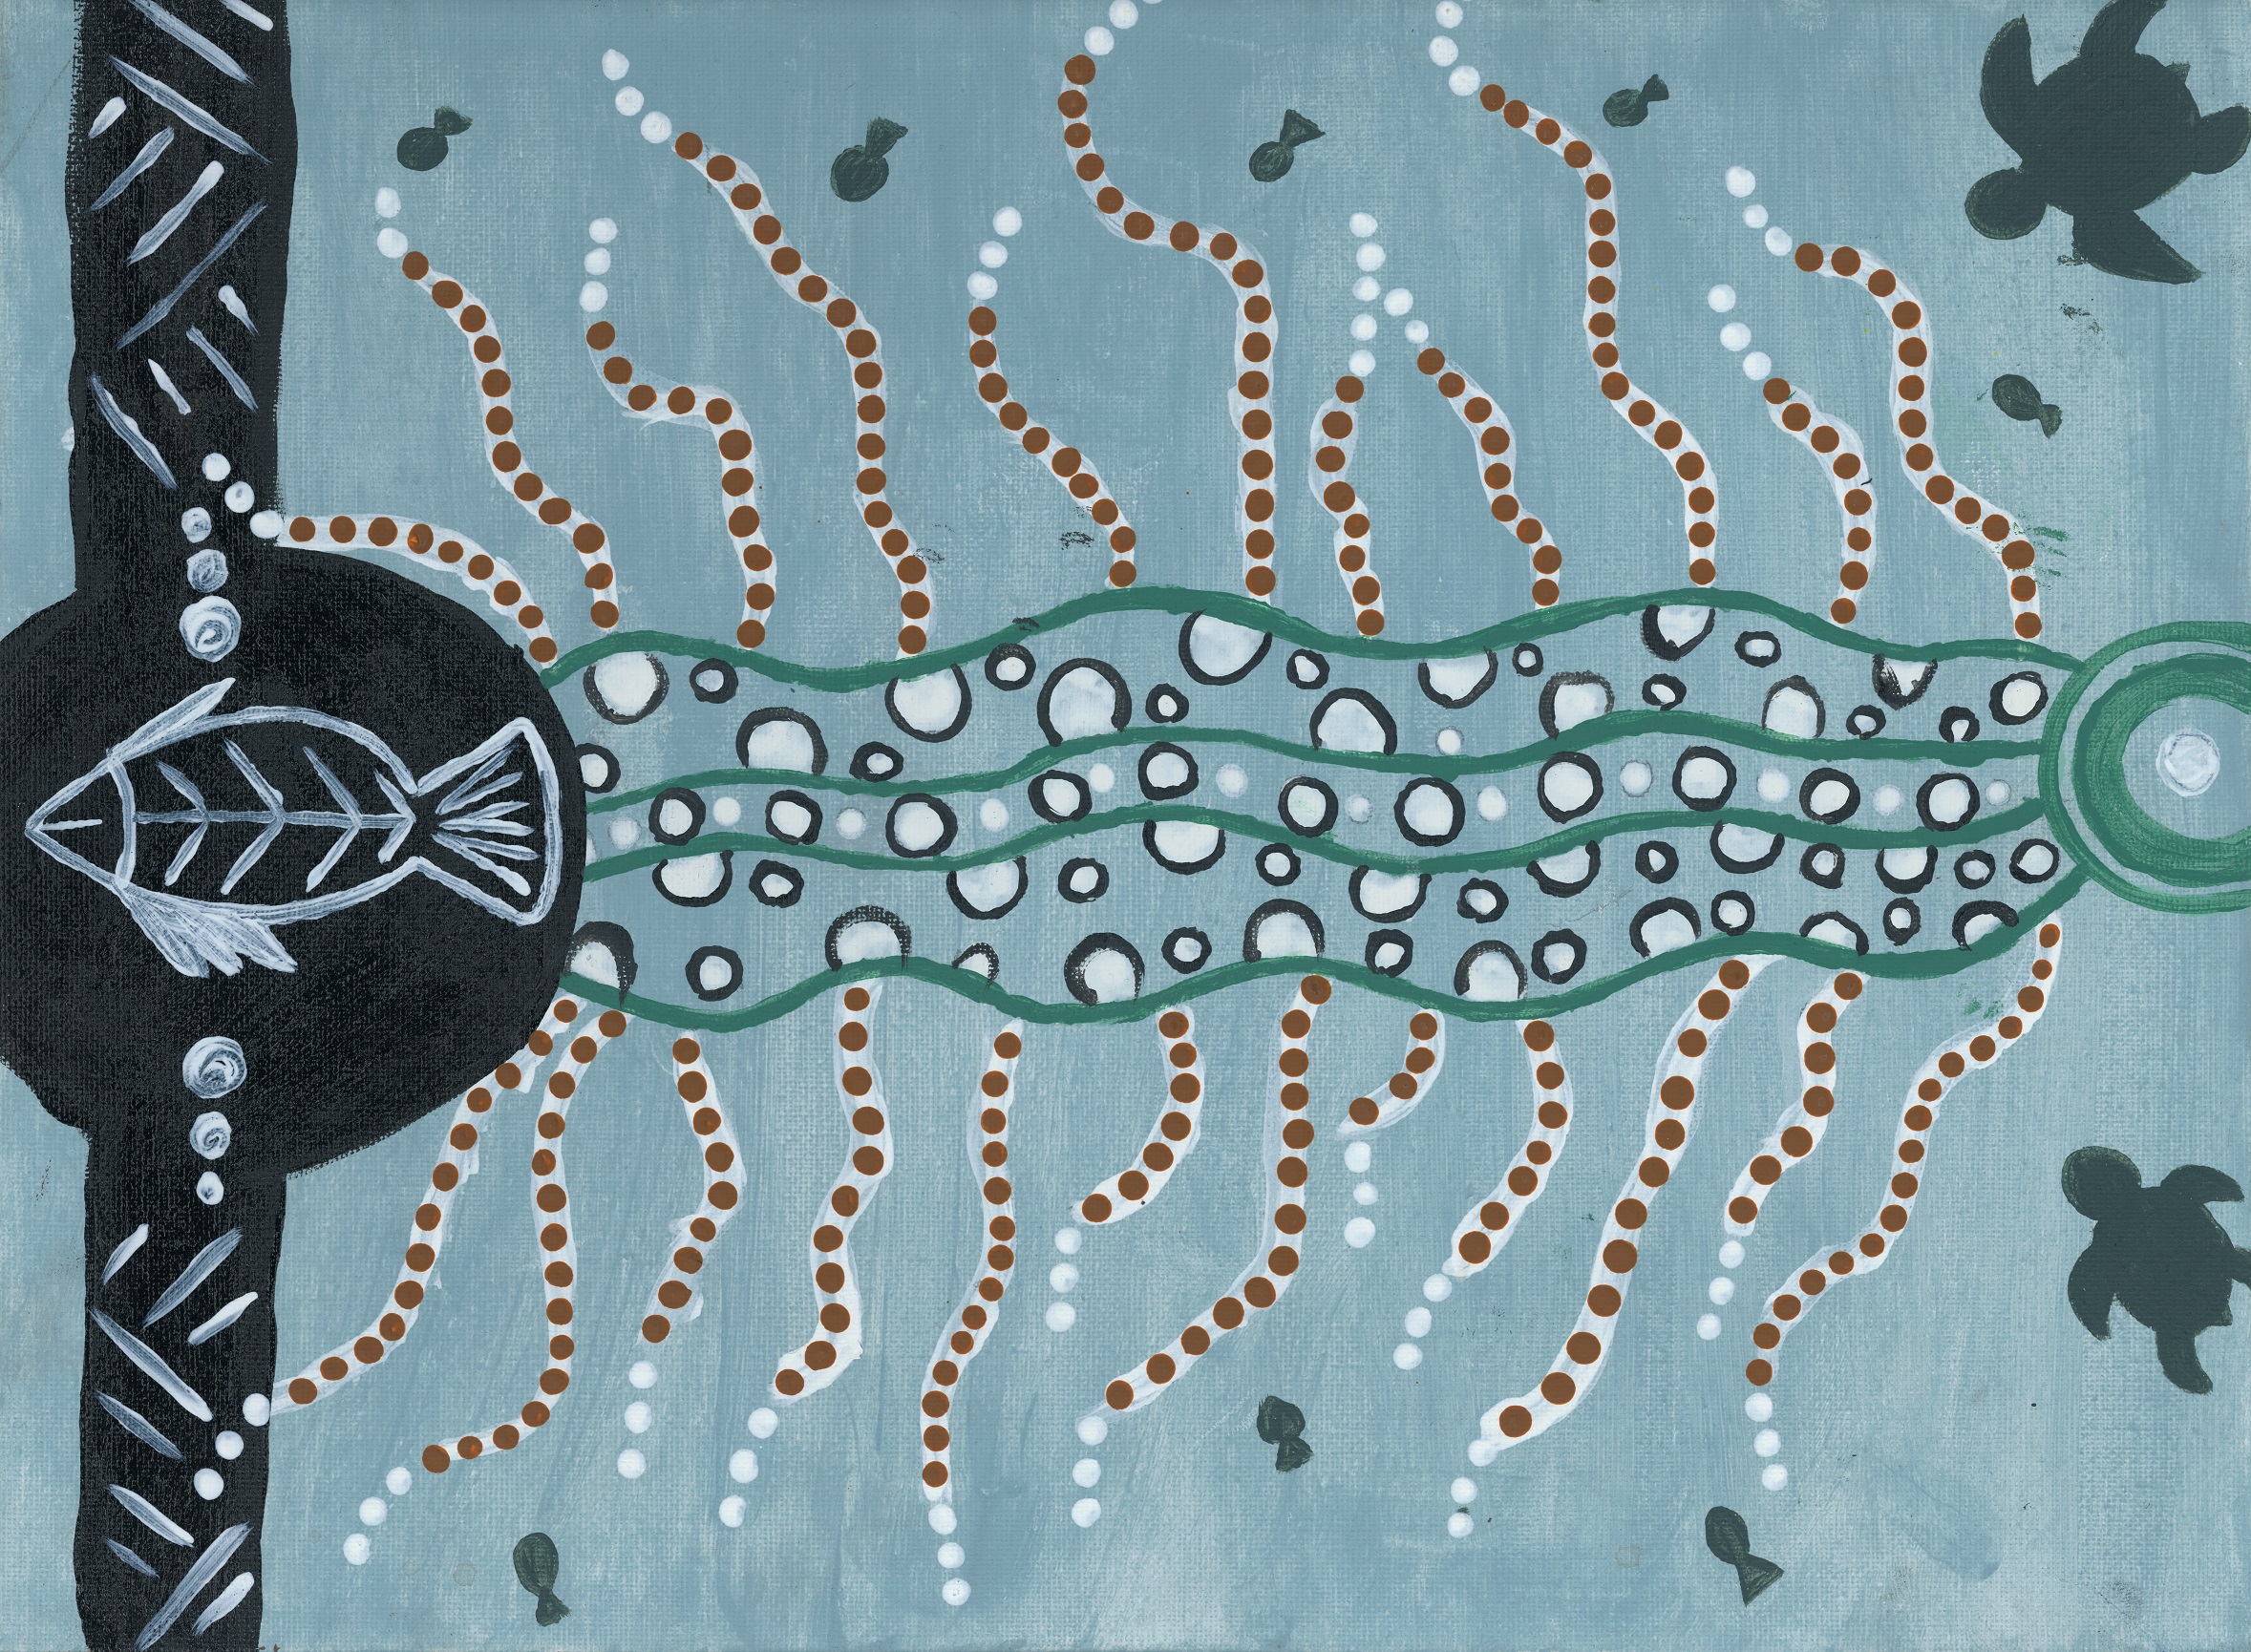 Aboriginal artwork of water with a fish swimming as Elders to show past, present and future and two sea turtles as younger generations to begin their learning journey